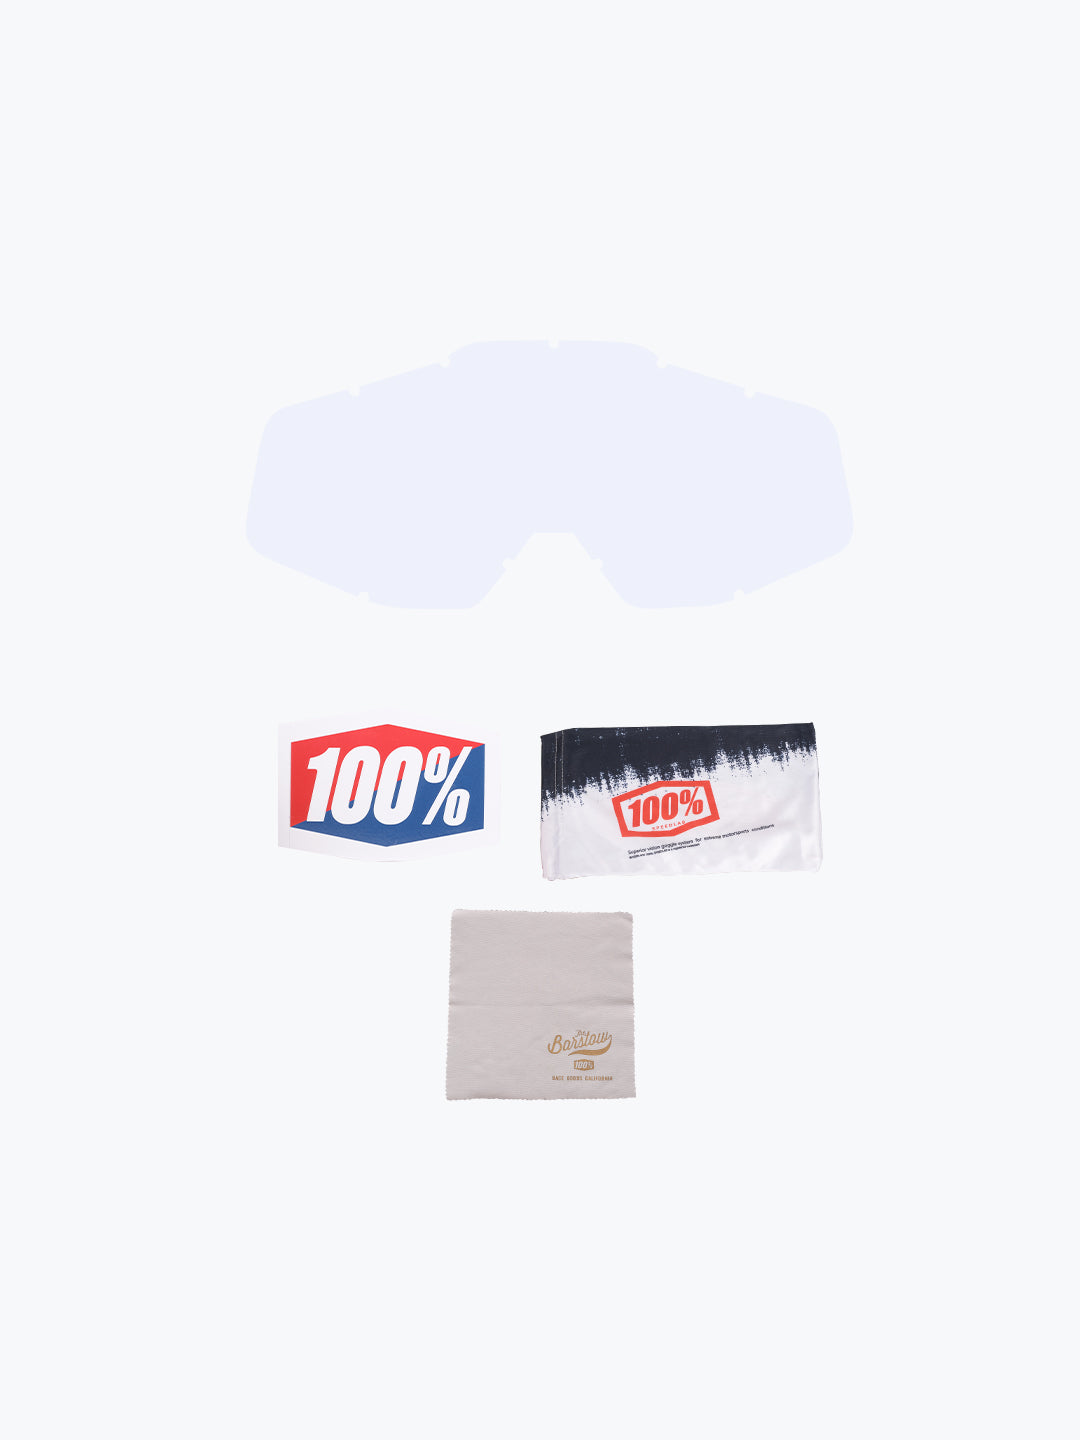 100% Goggles Red Blue Plain Tint